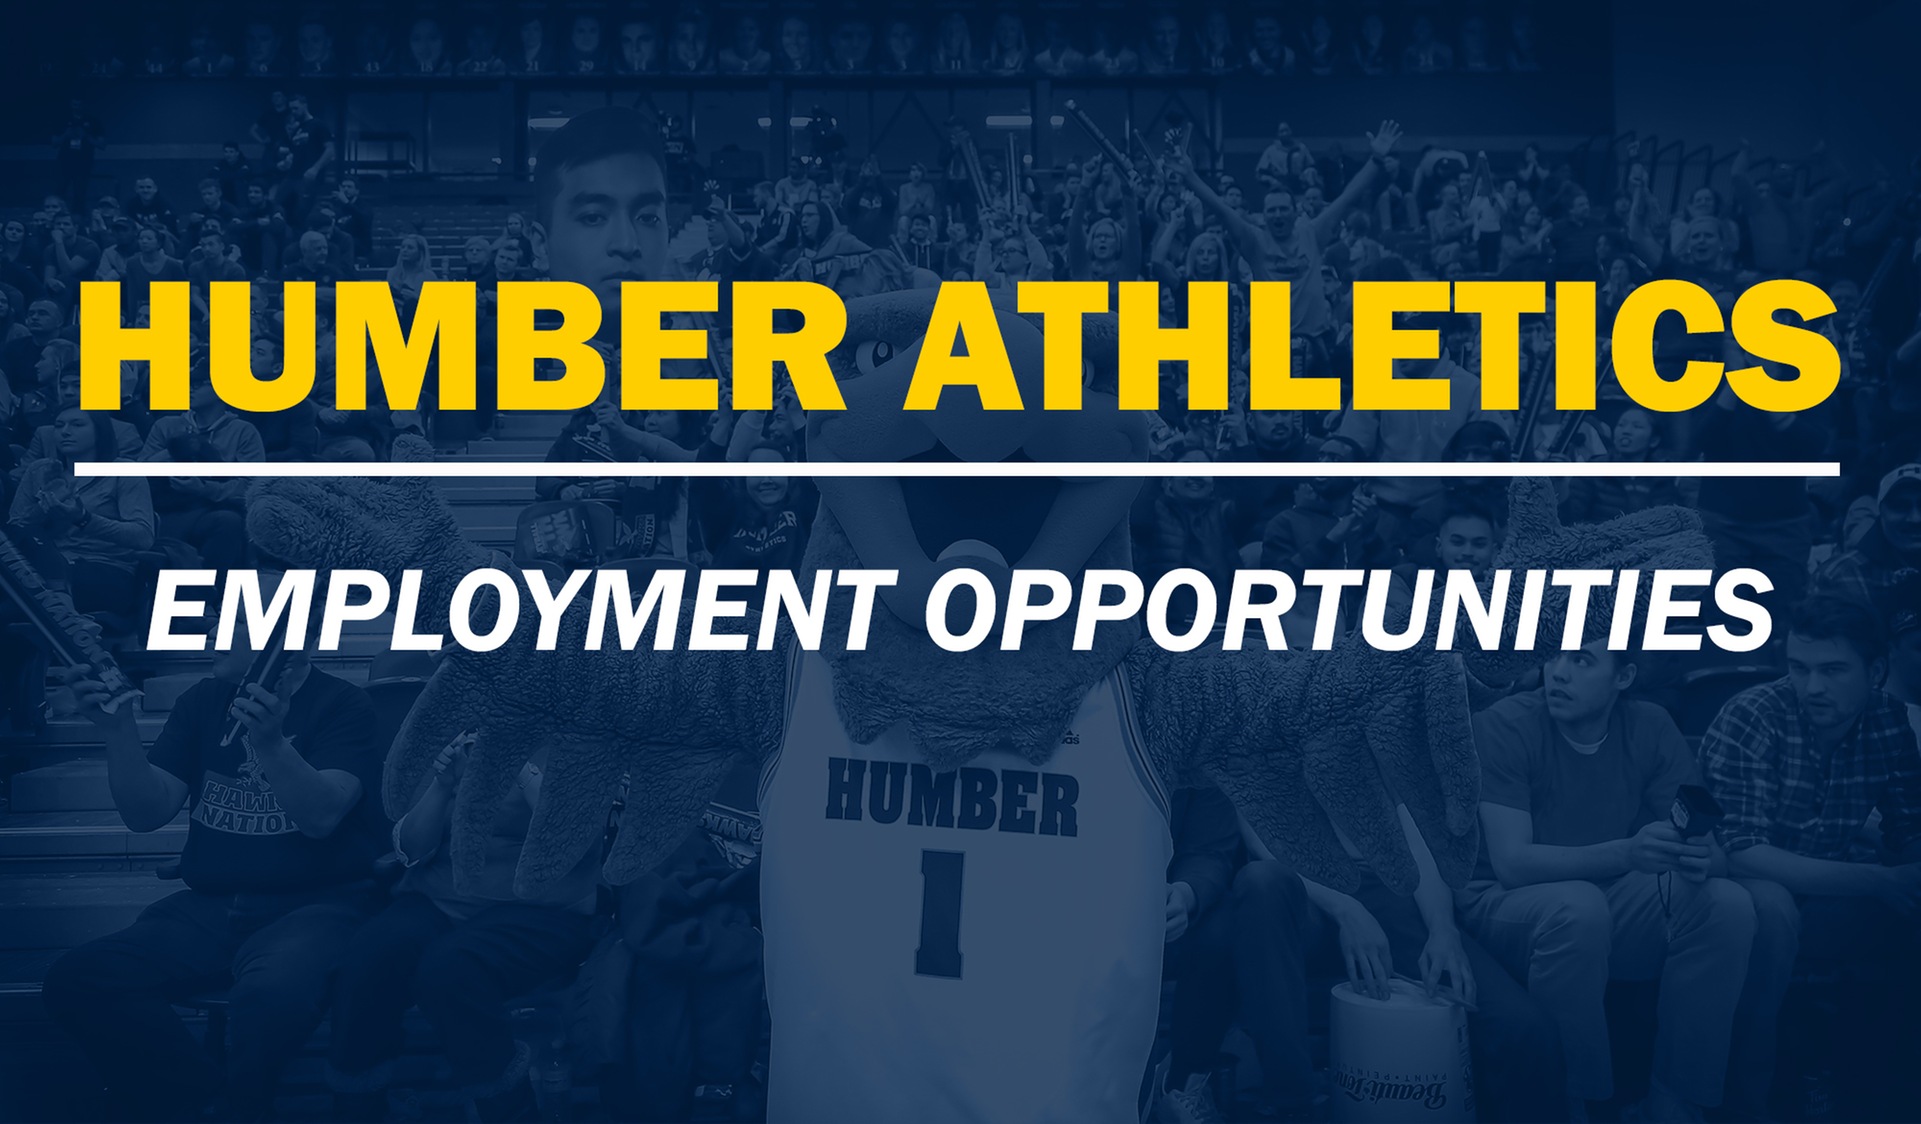 Humber Athletics Employment Opportunities